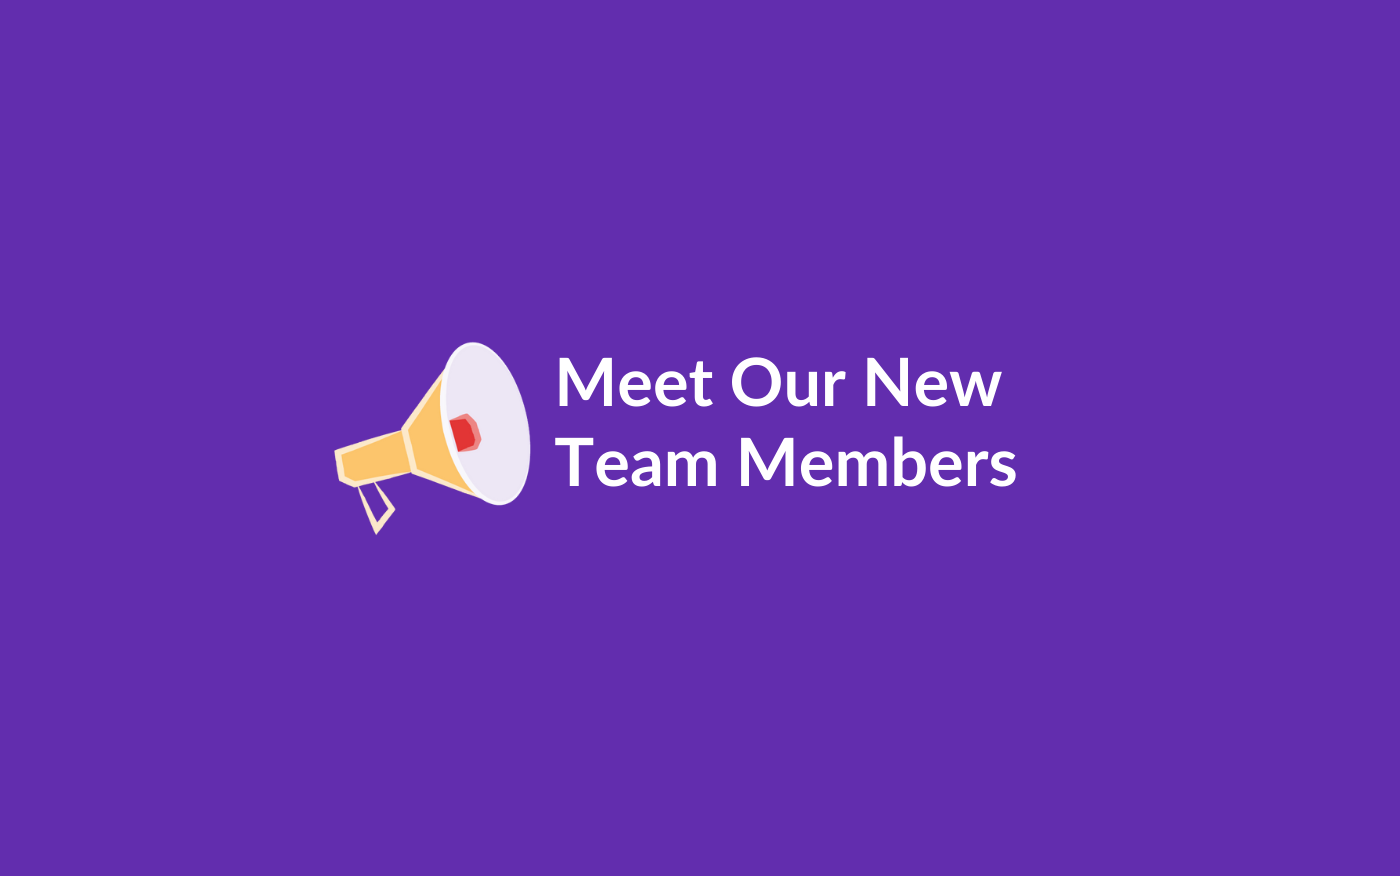 We are proud to welcome new team members to ITPC Global